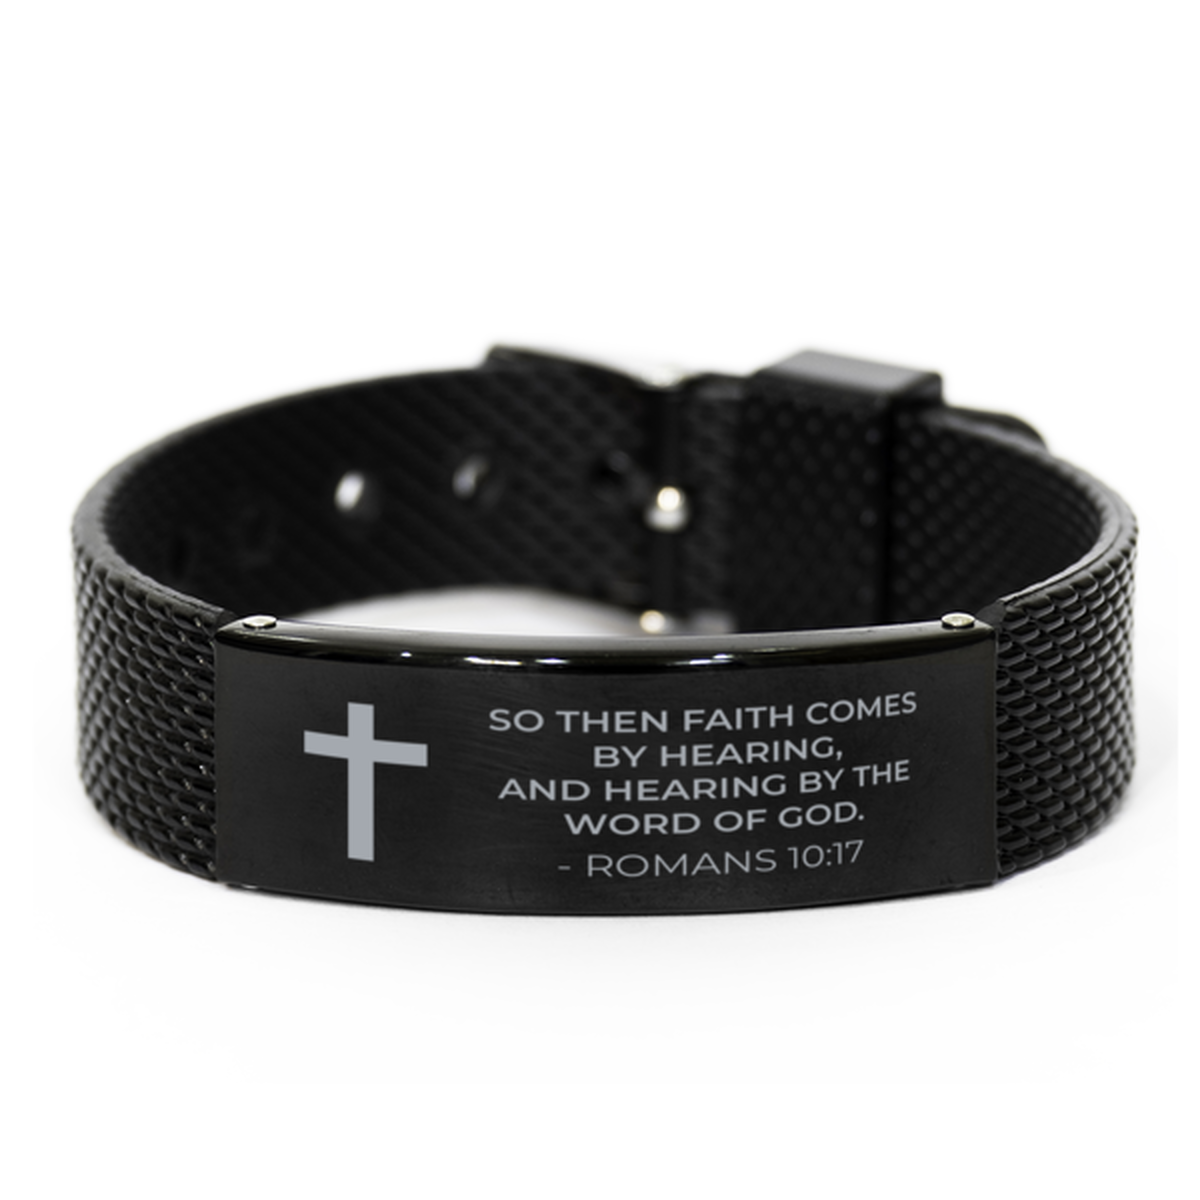 Christian Black Bracelet,, Romans 10:17 So Then Faith Comes By Hearing, And Hearing By, Motivational Bible Verse Gifts For Men Women